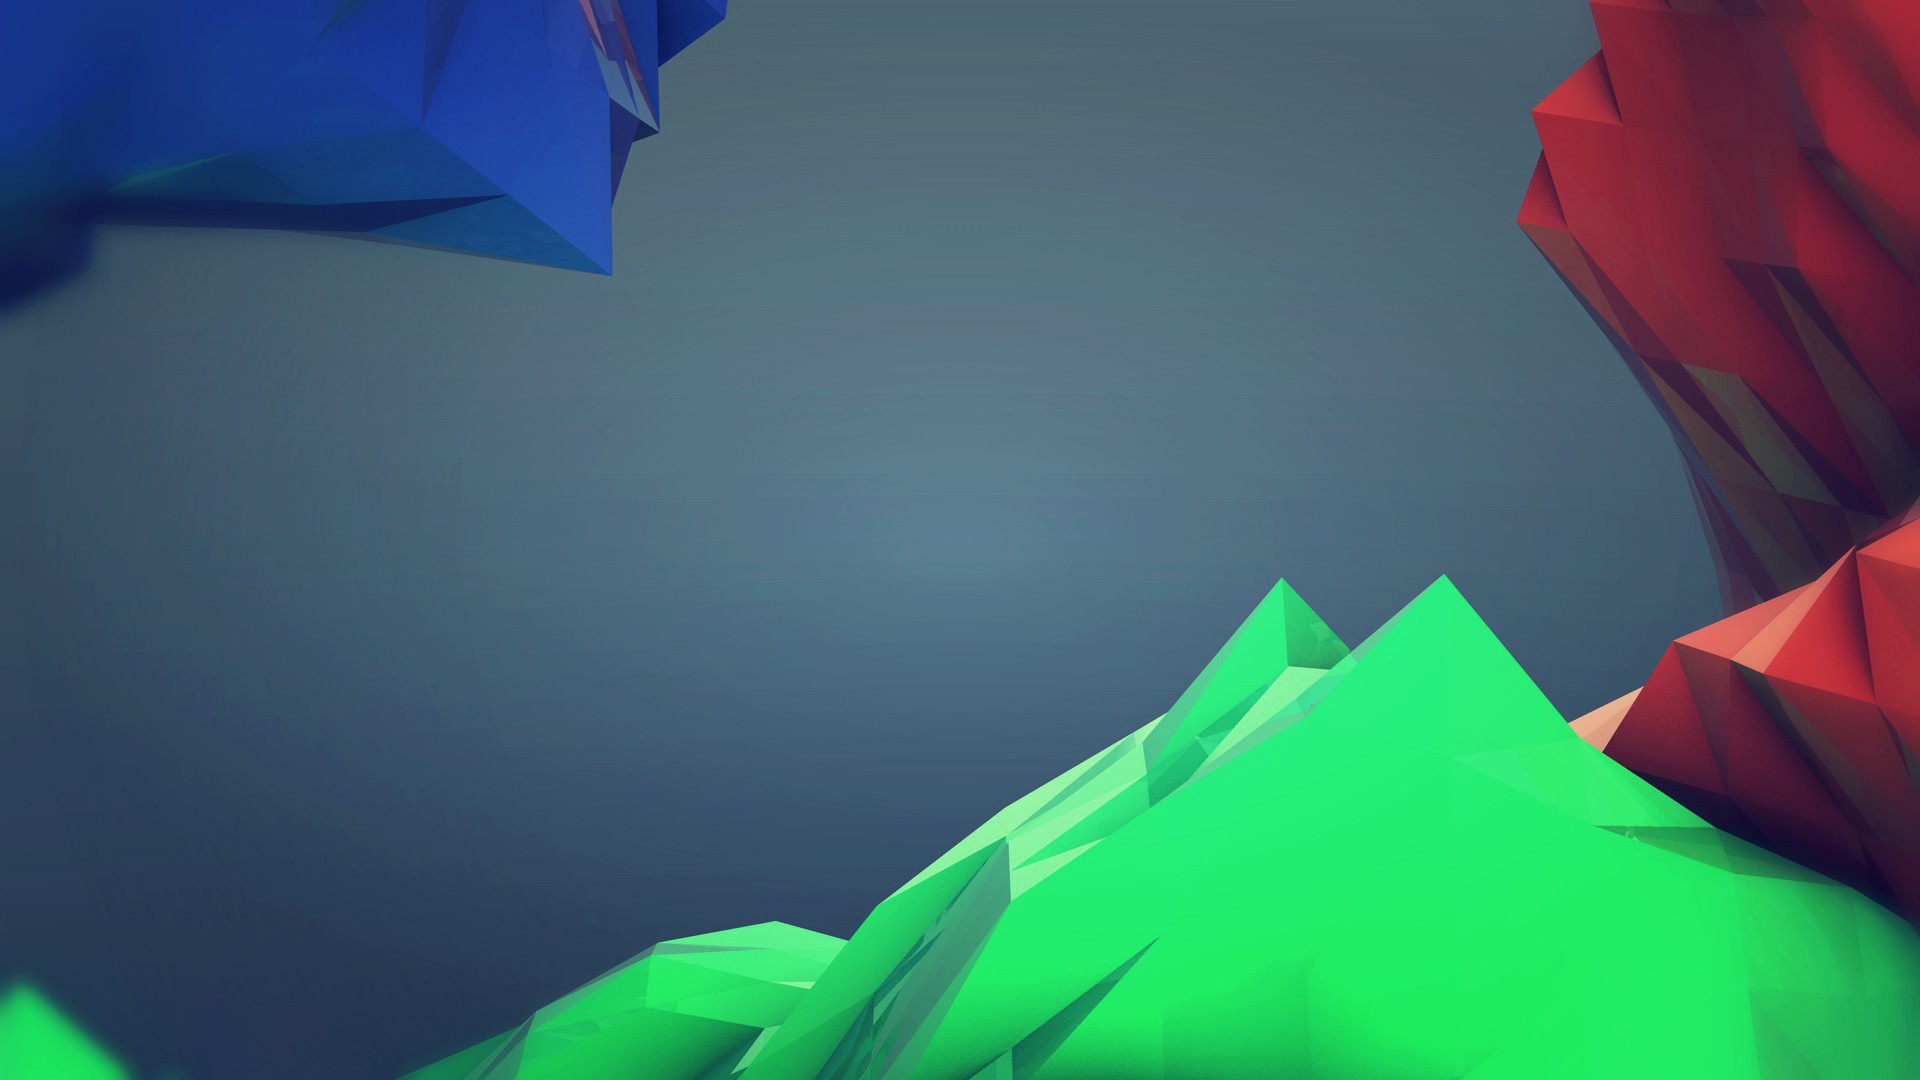 low poly, Digital art, Simple background Wallpaper